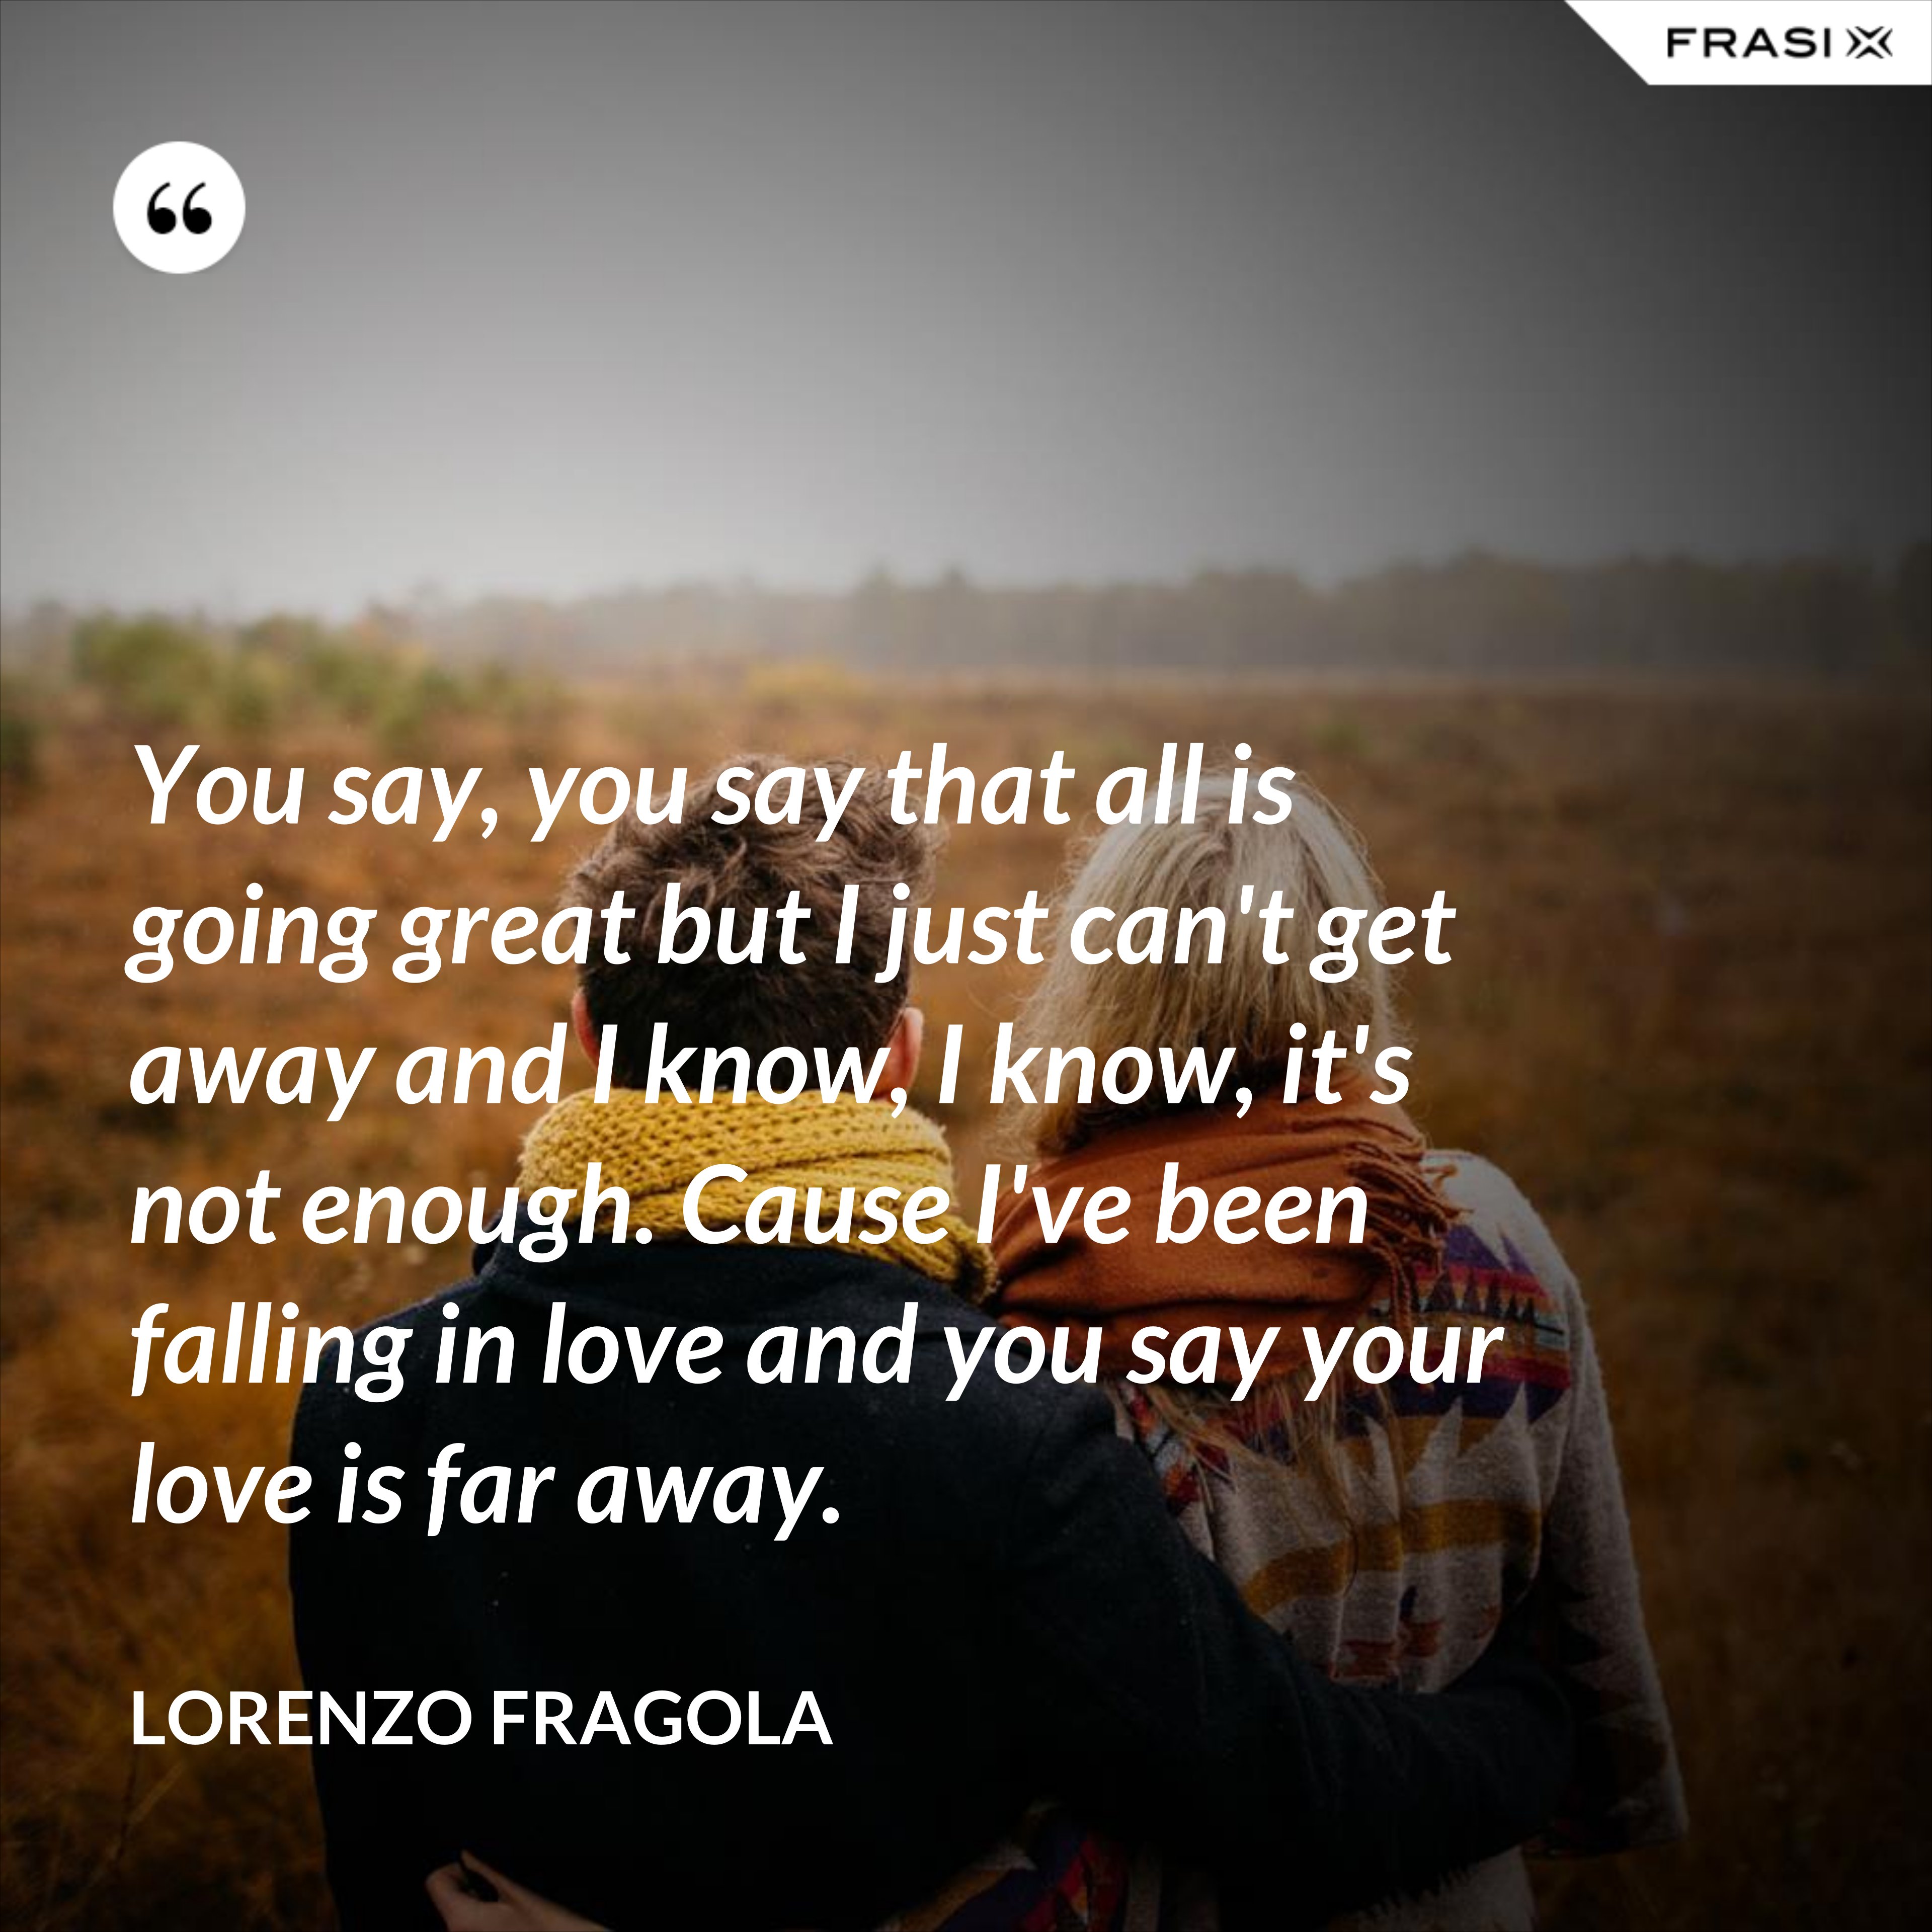 You say, you say that all is going great but I just can't get away and I know, I know, it's not enough. Cause I've been falling in love and you say your love is far away. - Lorenzo Fragola